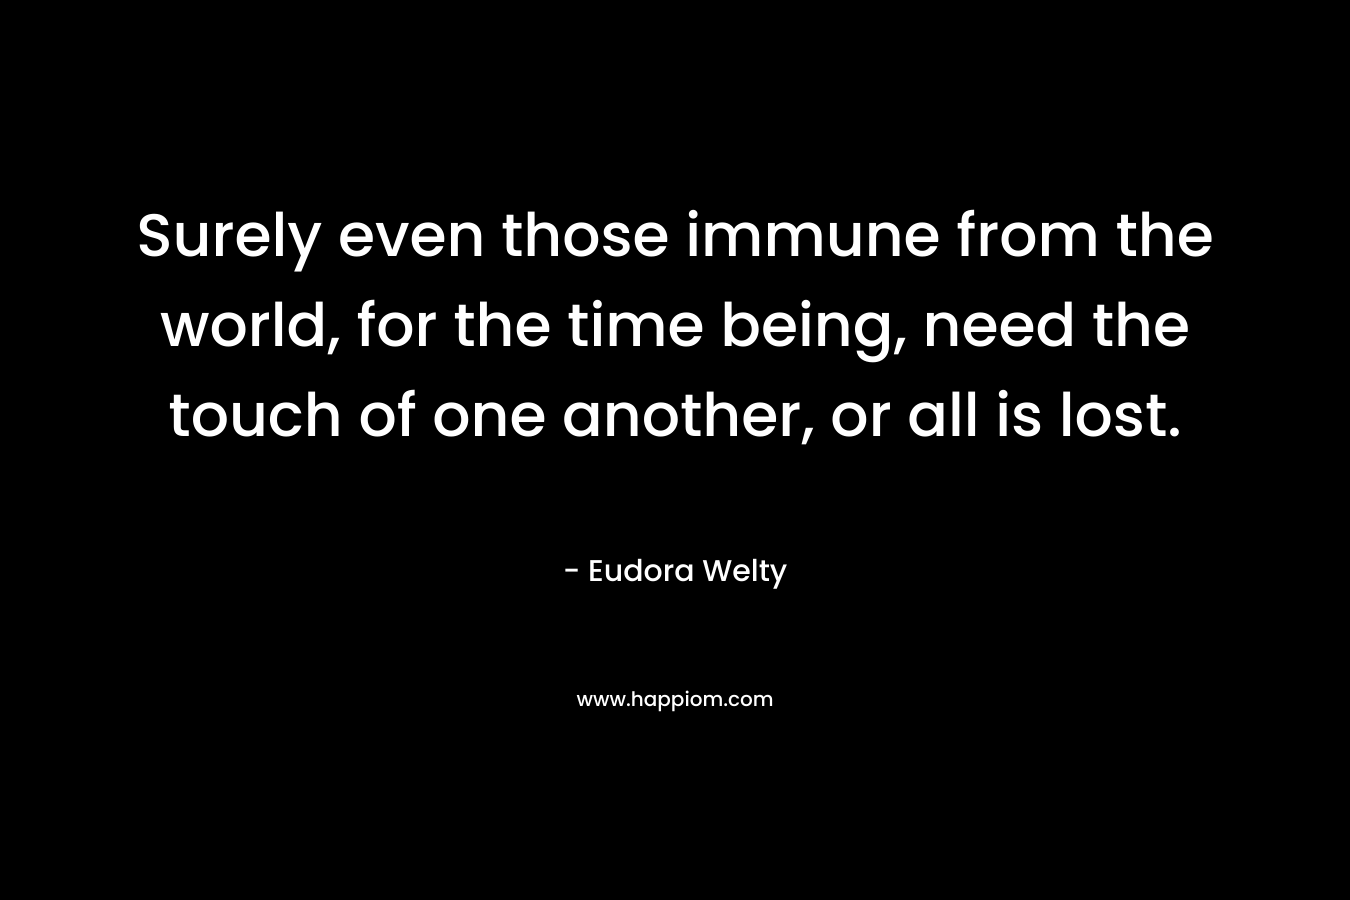 Surely even those immune from the world, for the time being, need the touch of one another, or all is lost.